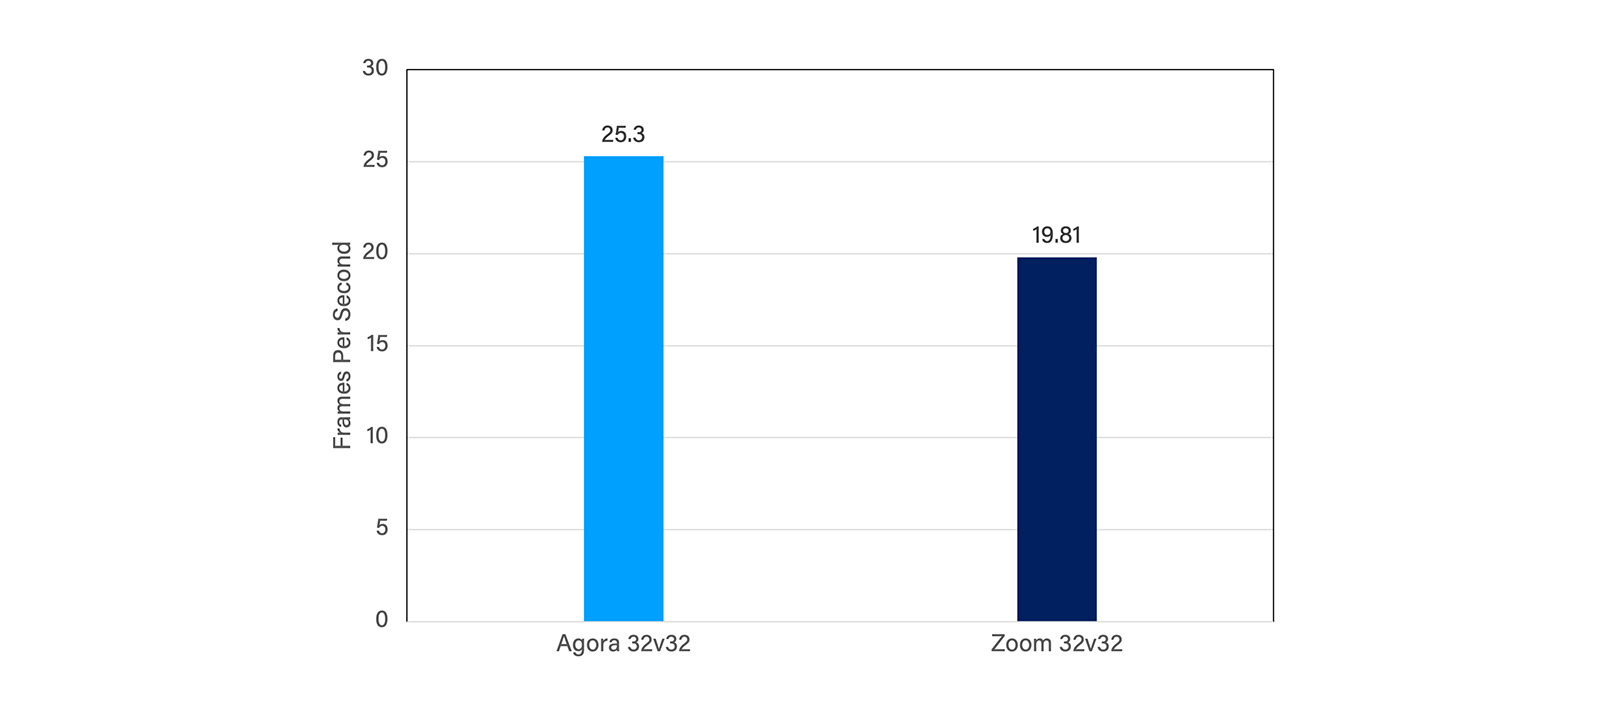 Figure 3: FPS comparison for Agora and Zoom with network having downlink packet loss of 25%.